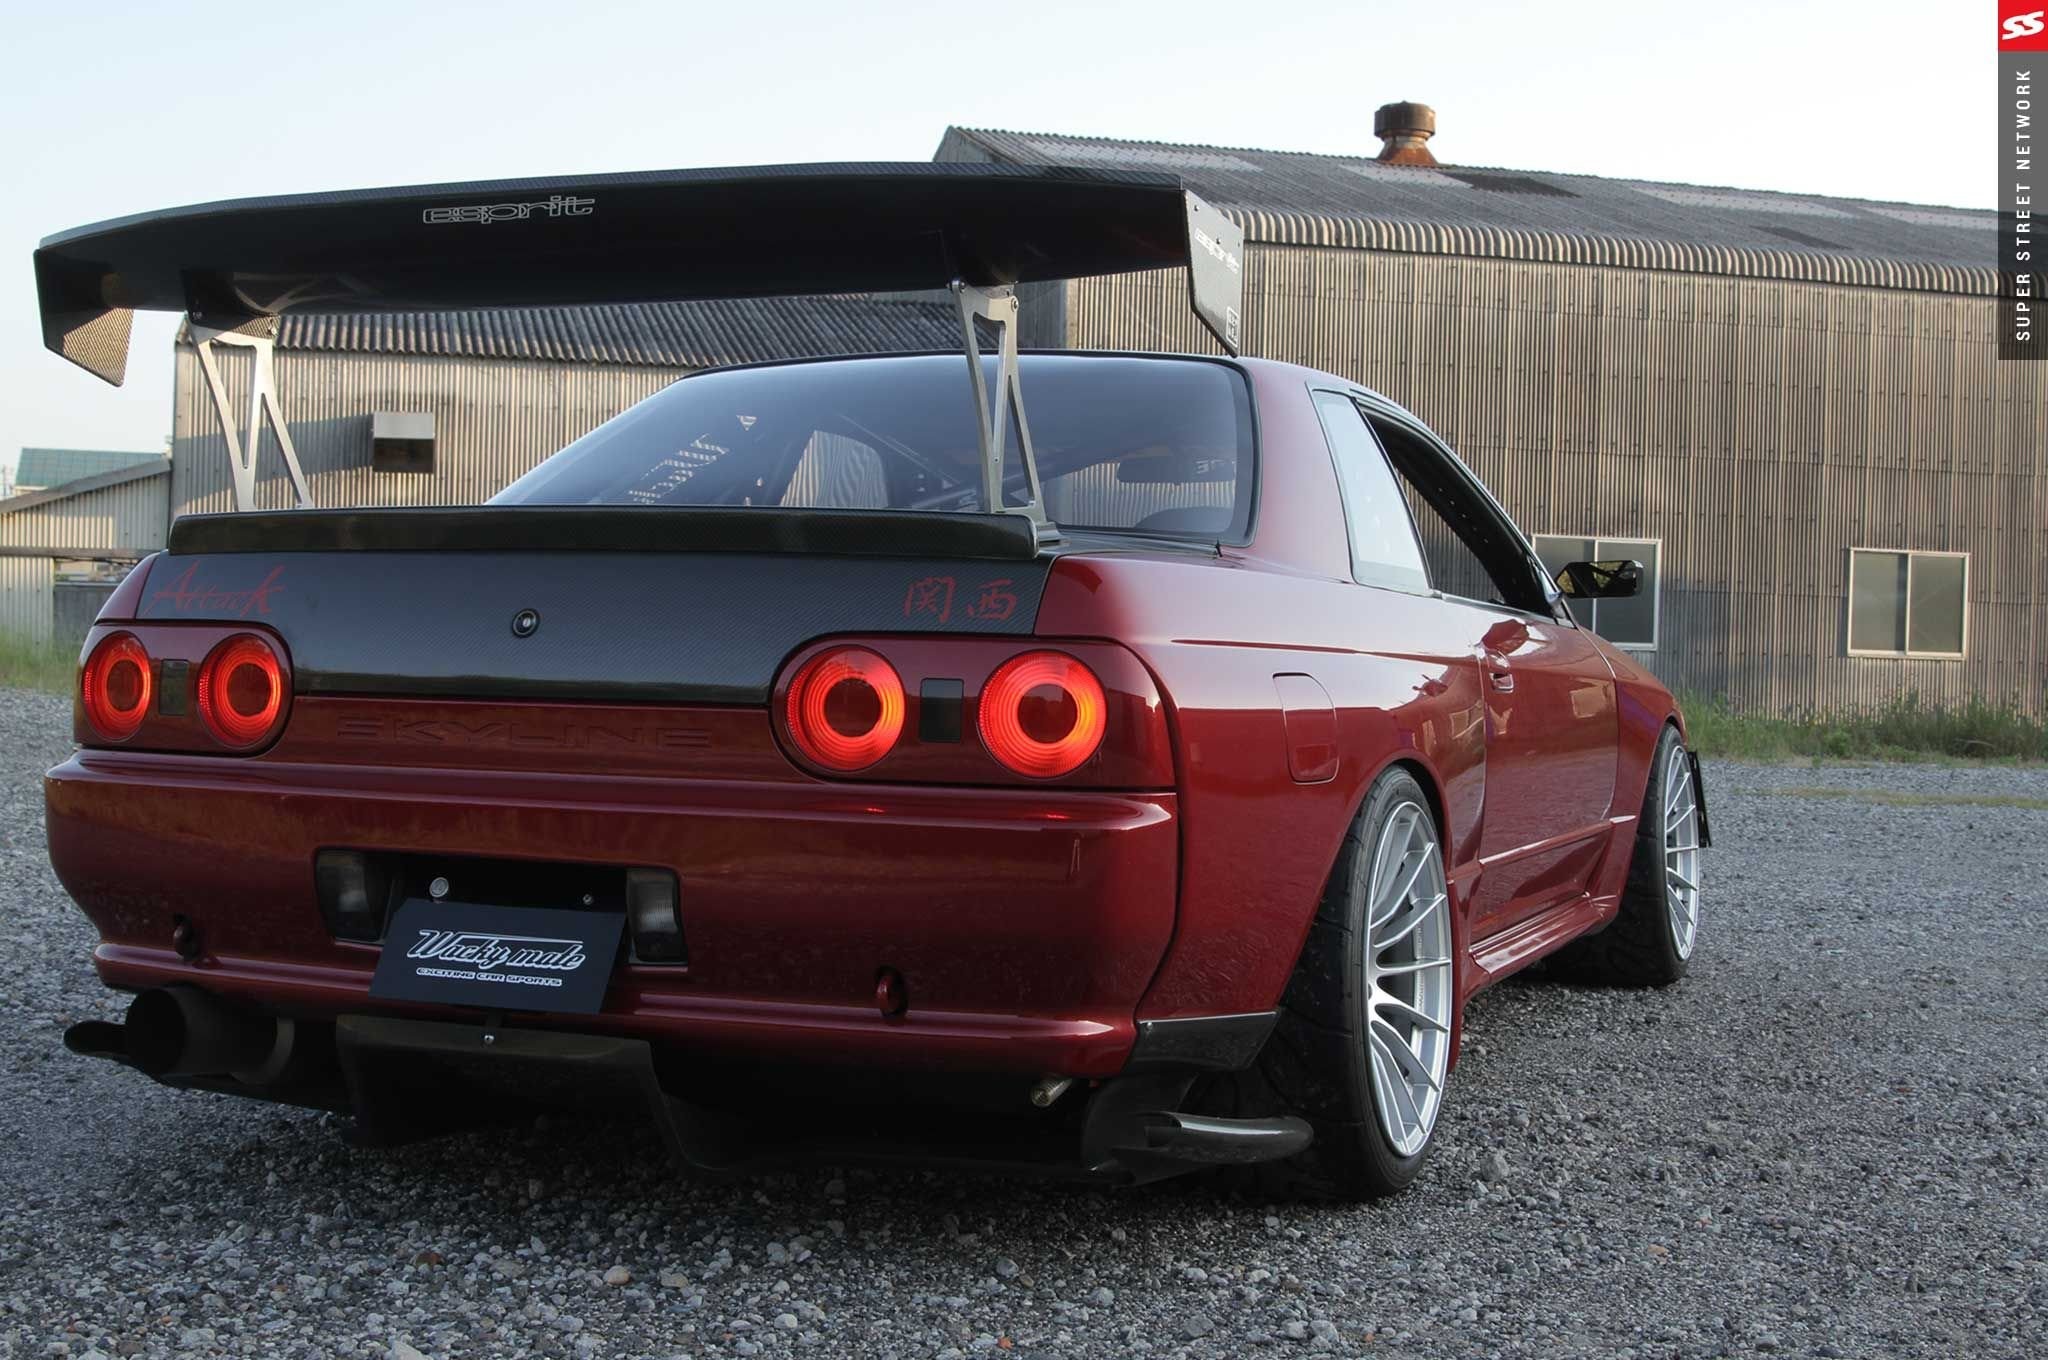 Nissan skyline r32 cars coupe modified wallpaper 764247 WallpaperUP